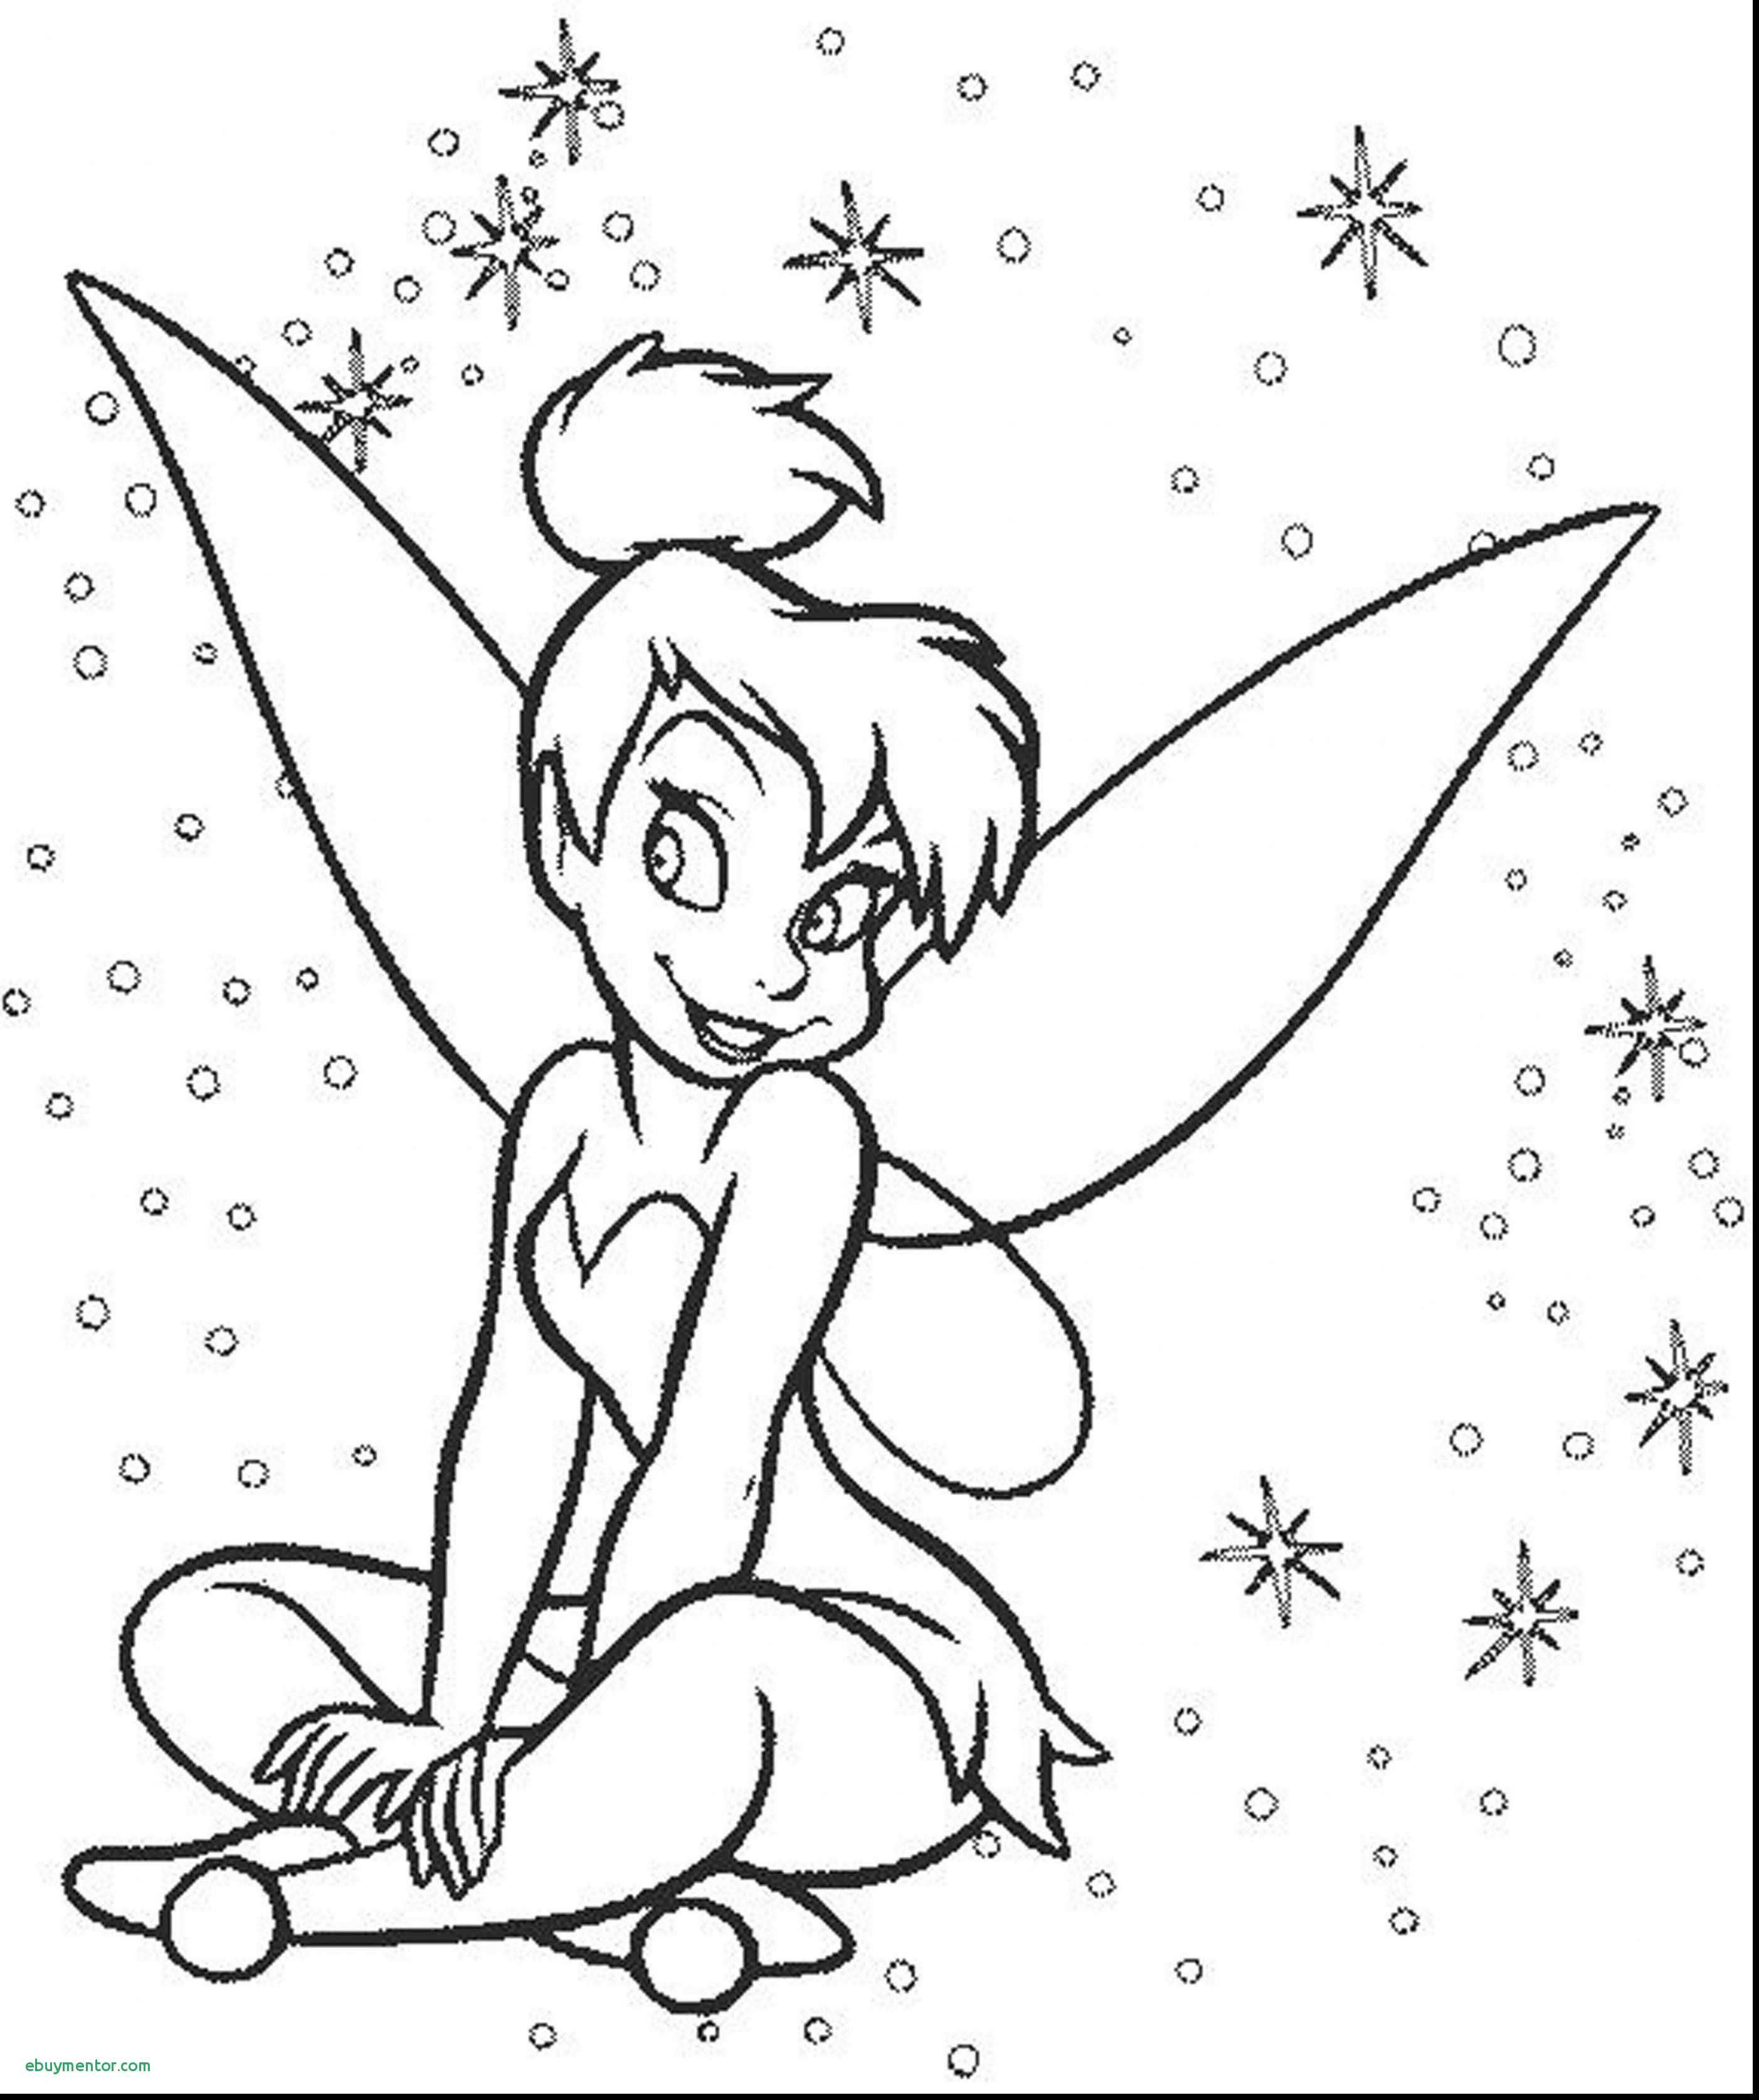 Coloring Pages ~ Free Colorings Tinkerbell Printablefree Printable - Tinkerbell Coloring Pages Printable Free